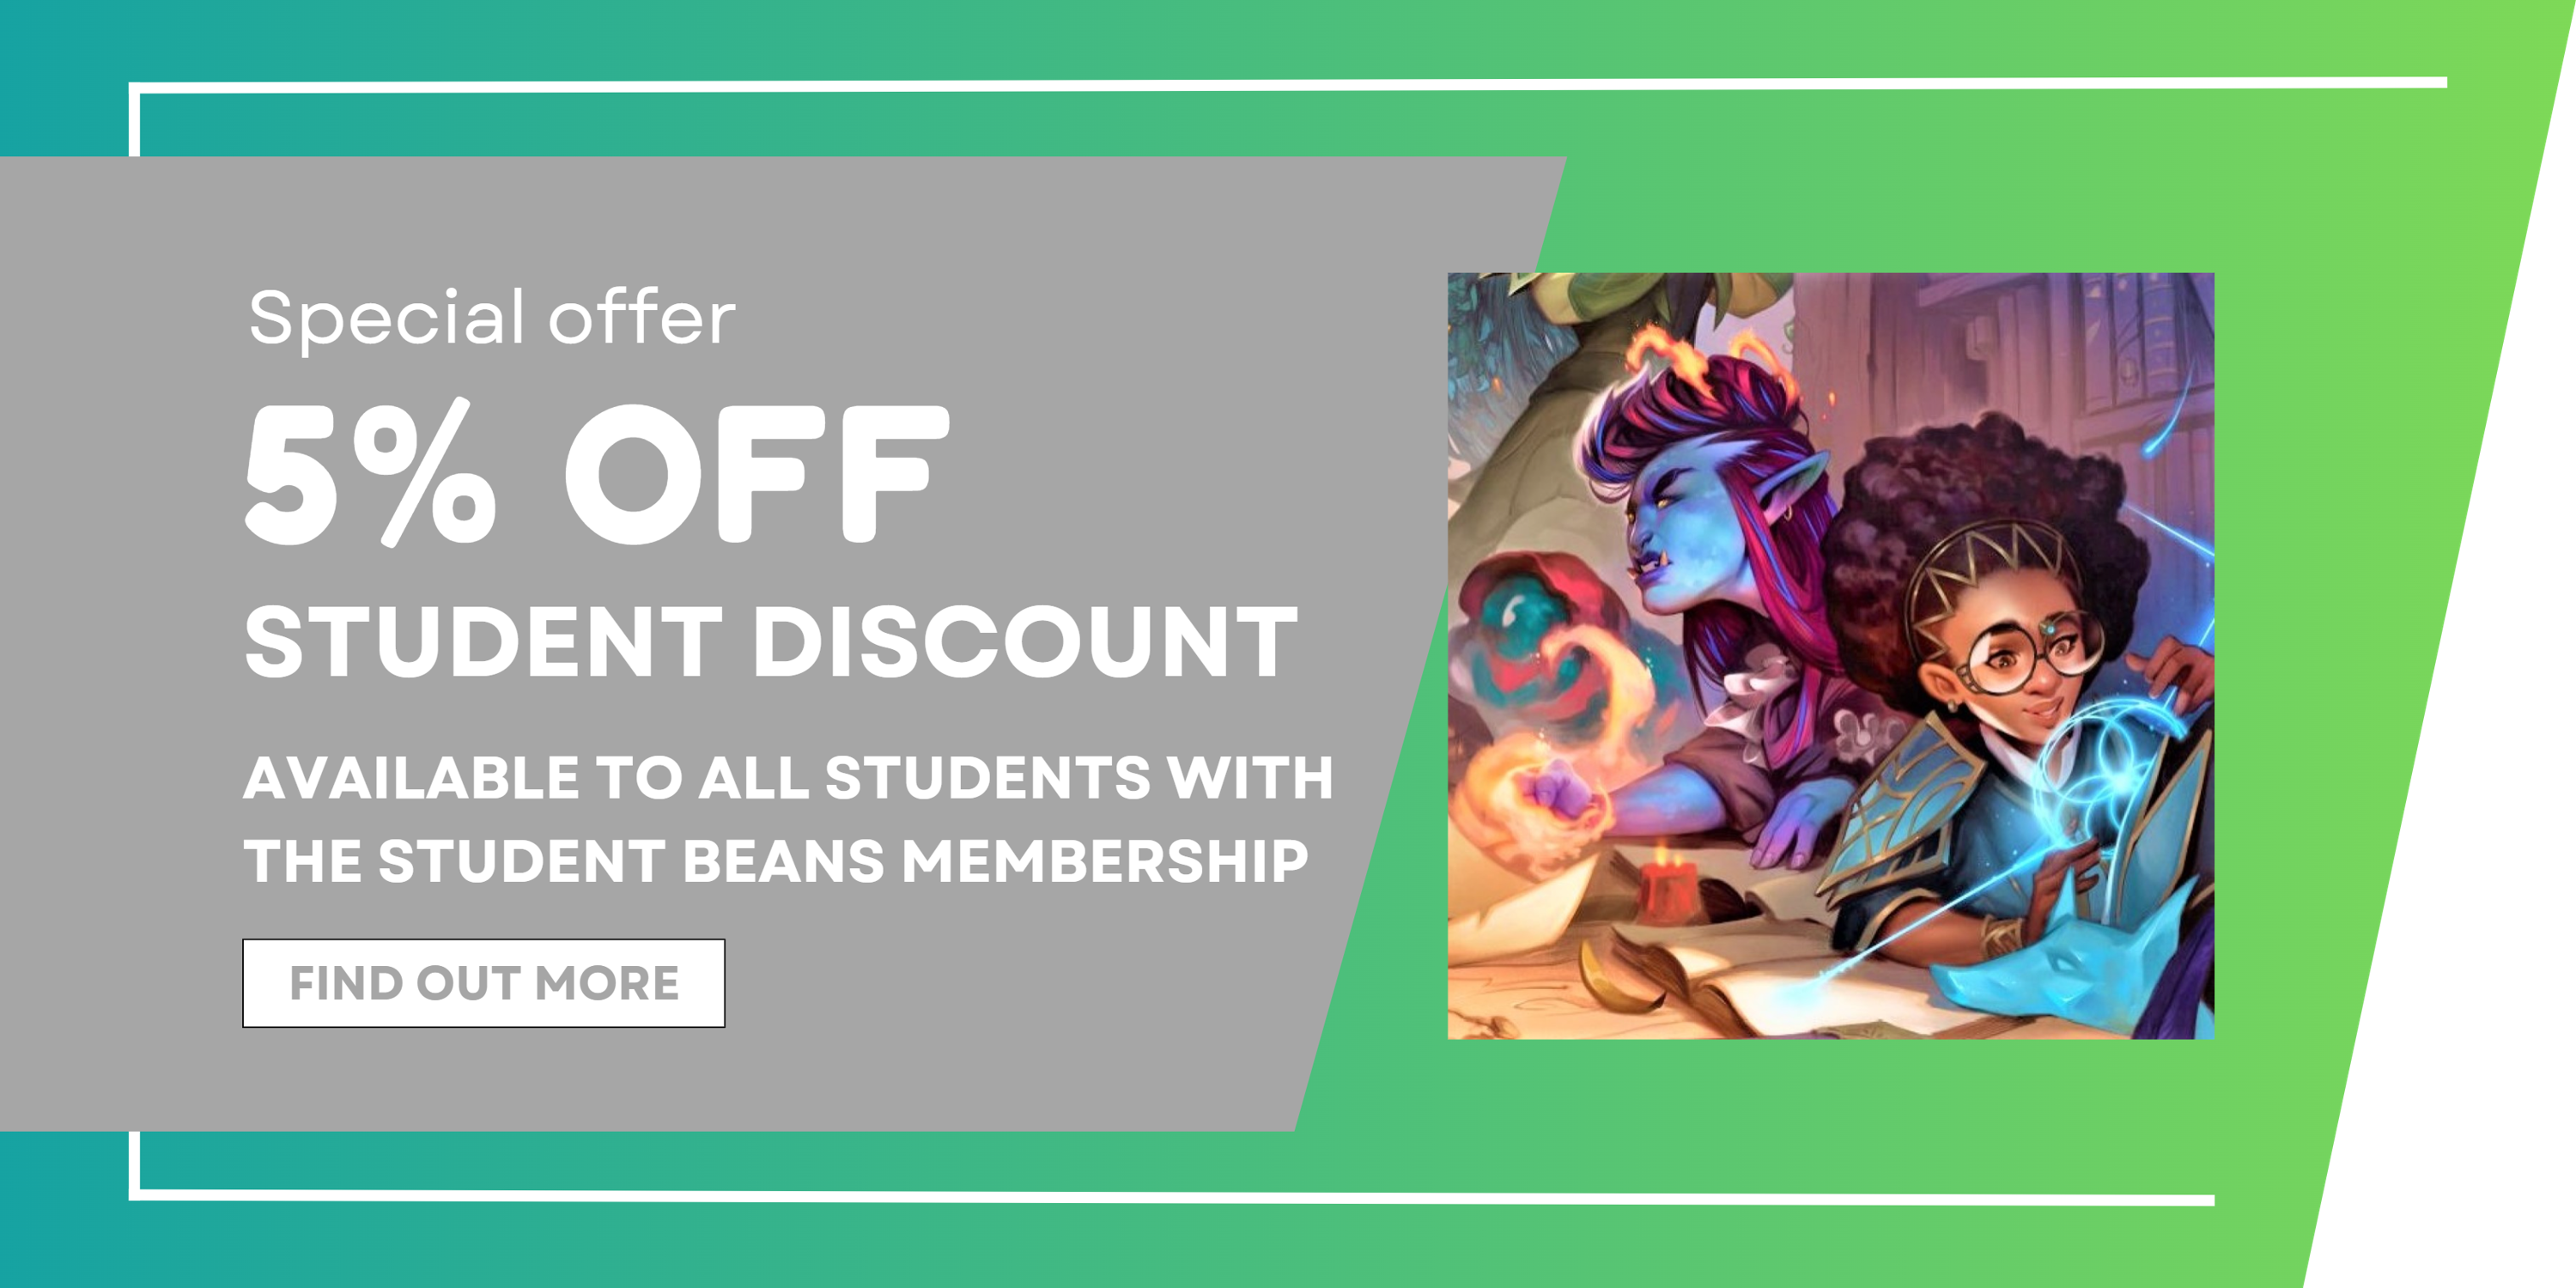 5% OFF student discount with Student Beans